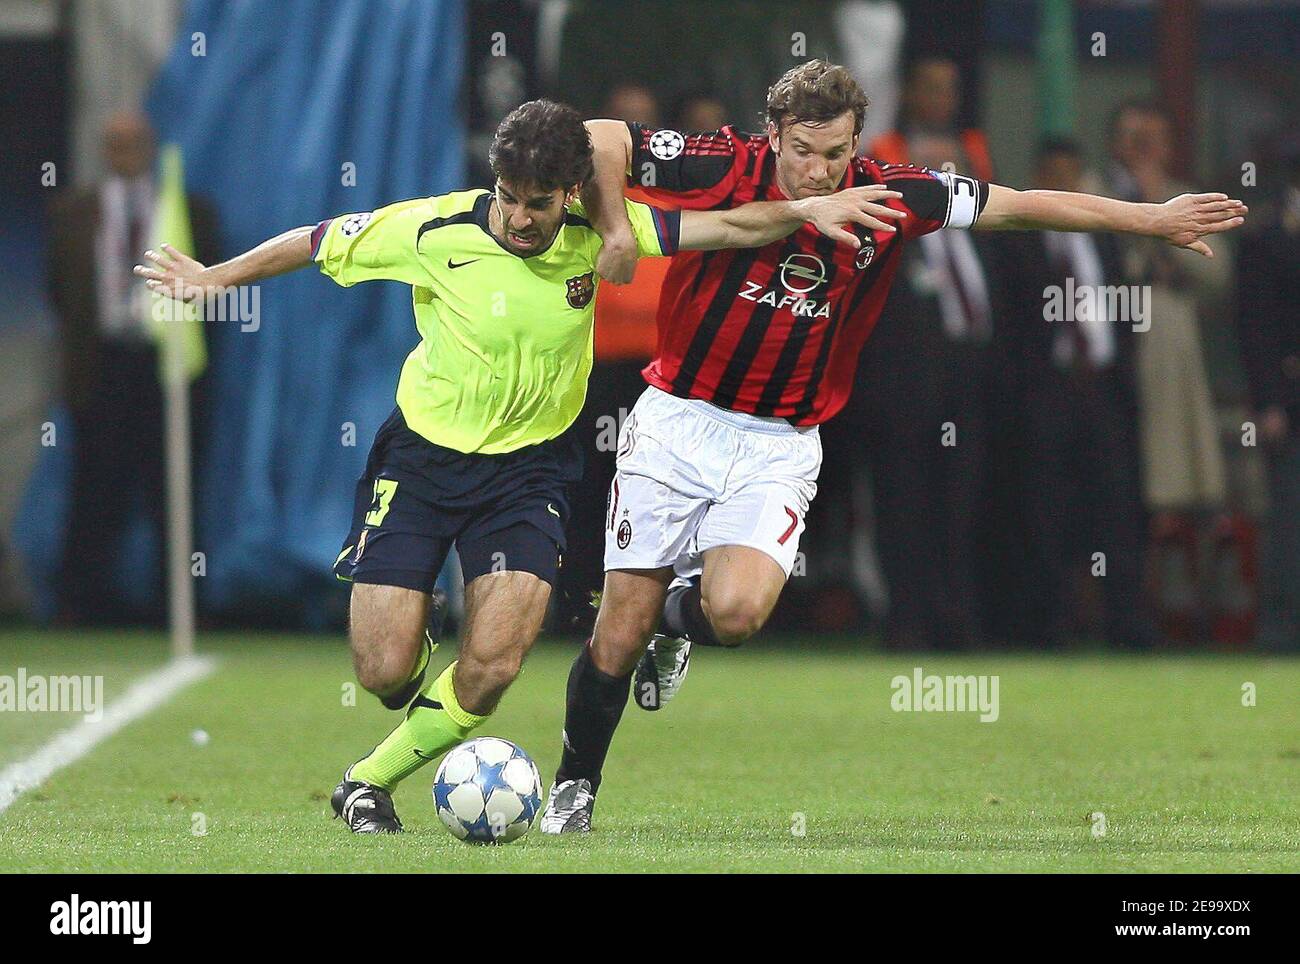 AC Milan's Andriy Shevchenko and FC Barcelona's Presas Oleger battle for  the ball during the UEFA Champions League Semi-Final First Leg, AC Milan vs  Barcelona in Milan, Italy, on April 18, 2006.